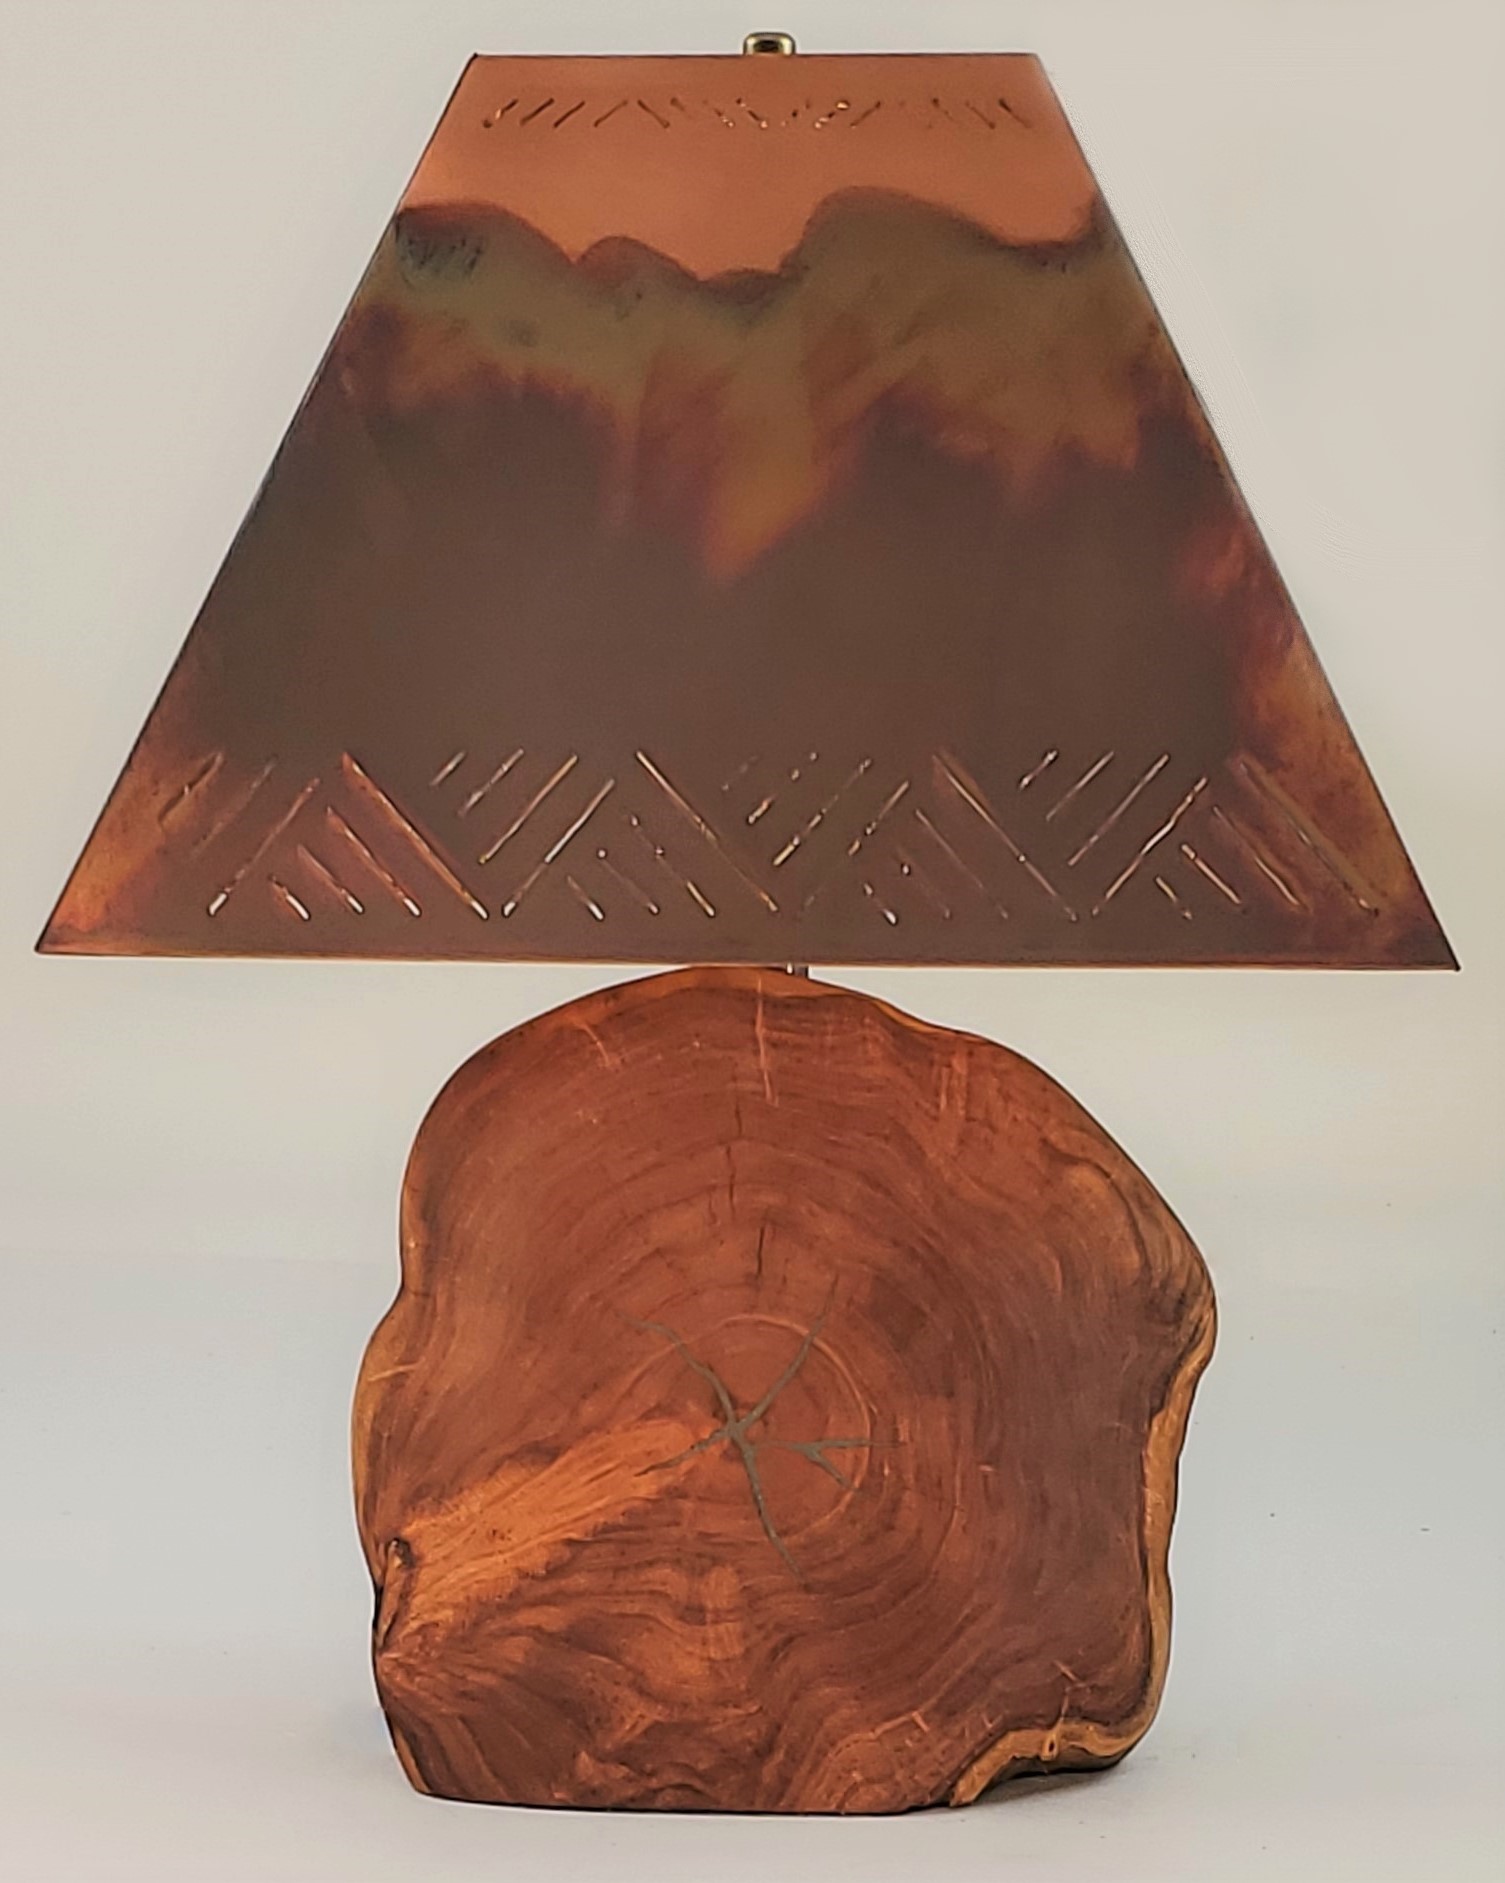 Mesquite Lamp with Turquoise Inlay and Copper Shade (Height: 20.5") #1027